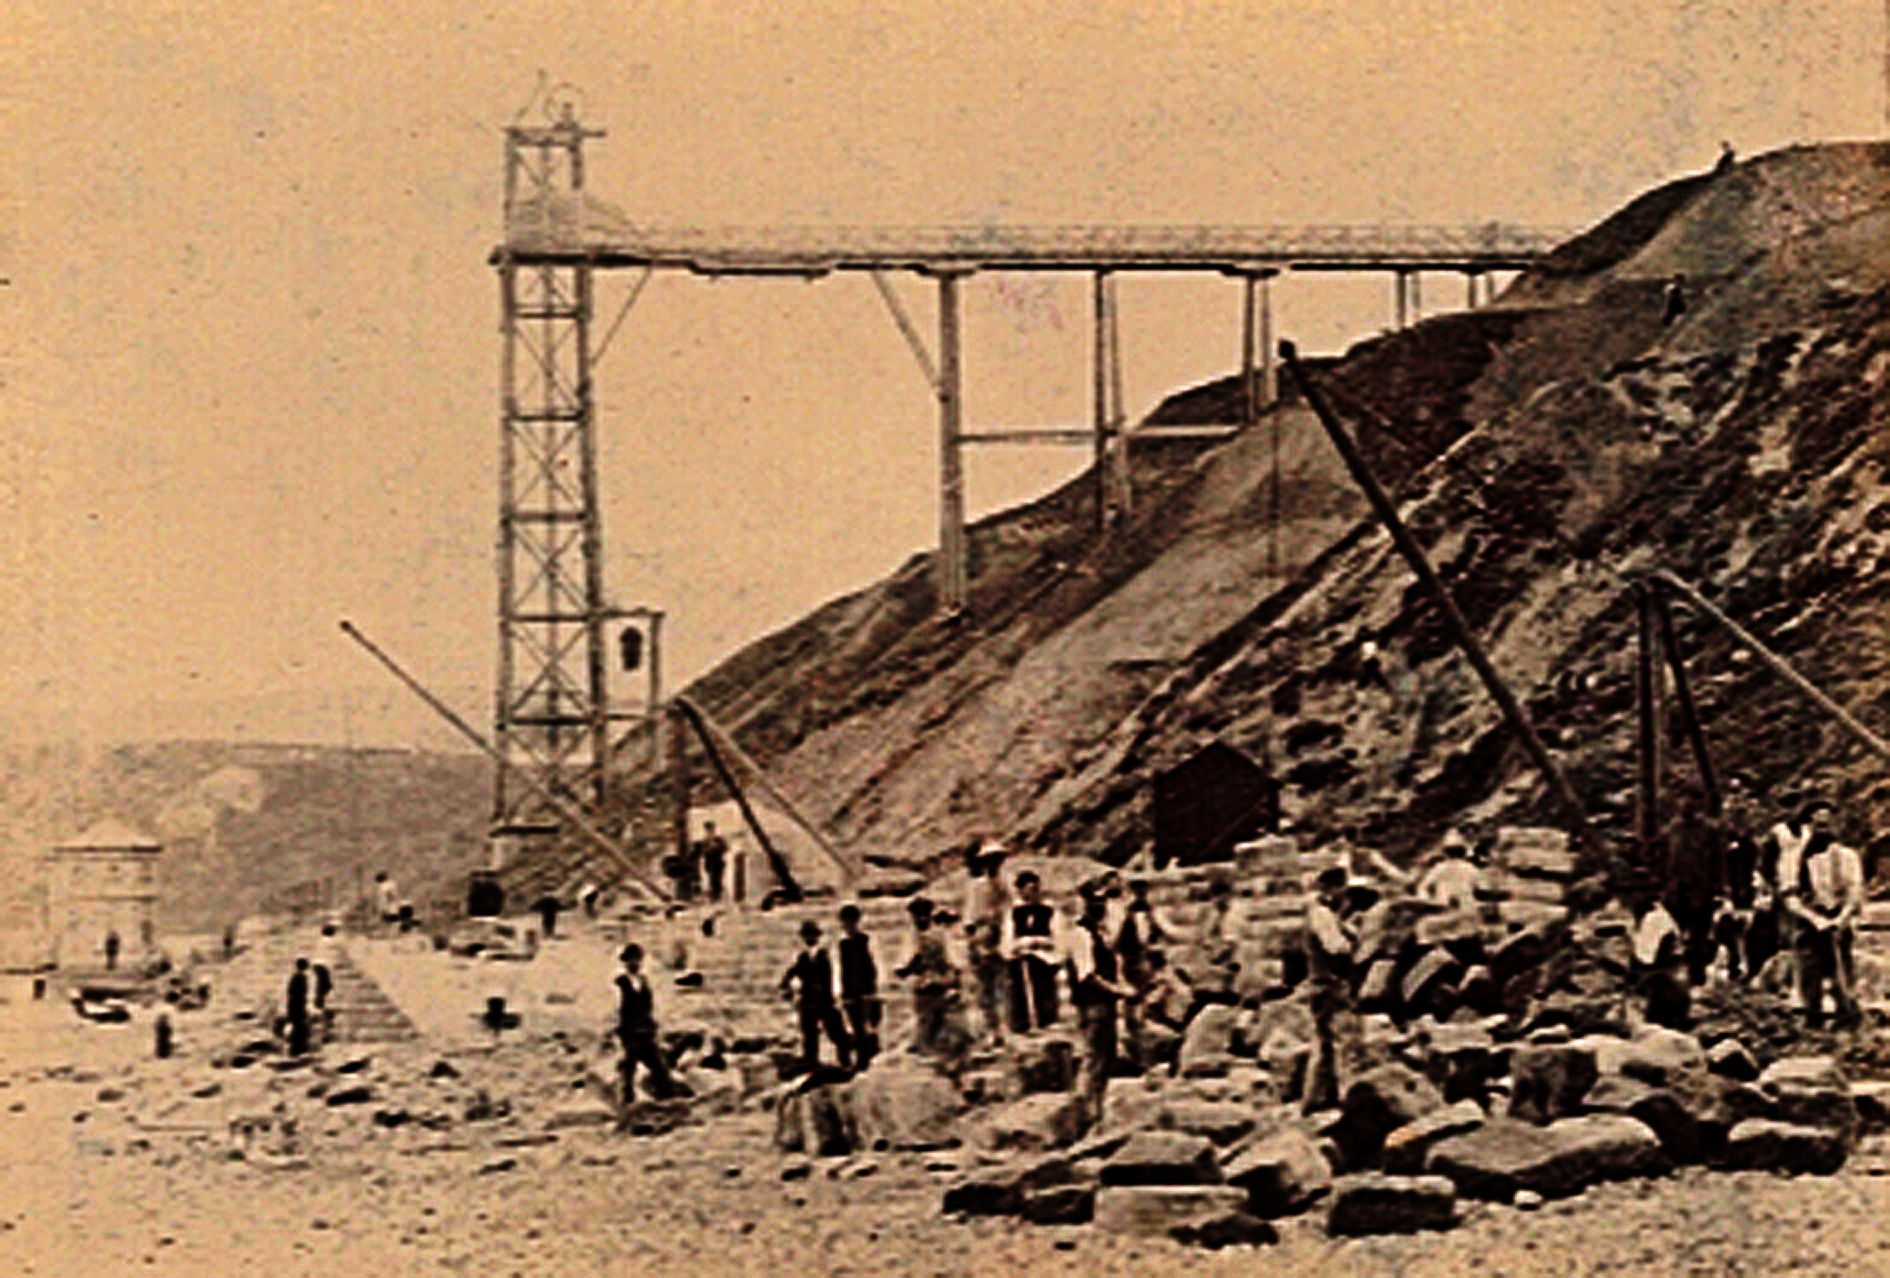 Peter Sotherans picture of Saltburn from 1880 showing the vertical hoist that was built to drop the stone railway sleepers to the promenade. Holidaymakers were also able to use it, although it had the worrying habit of getting jammed halfway